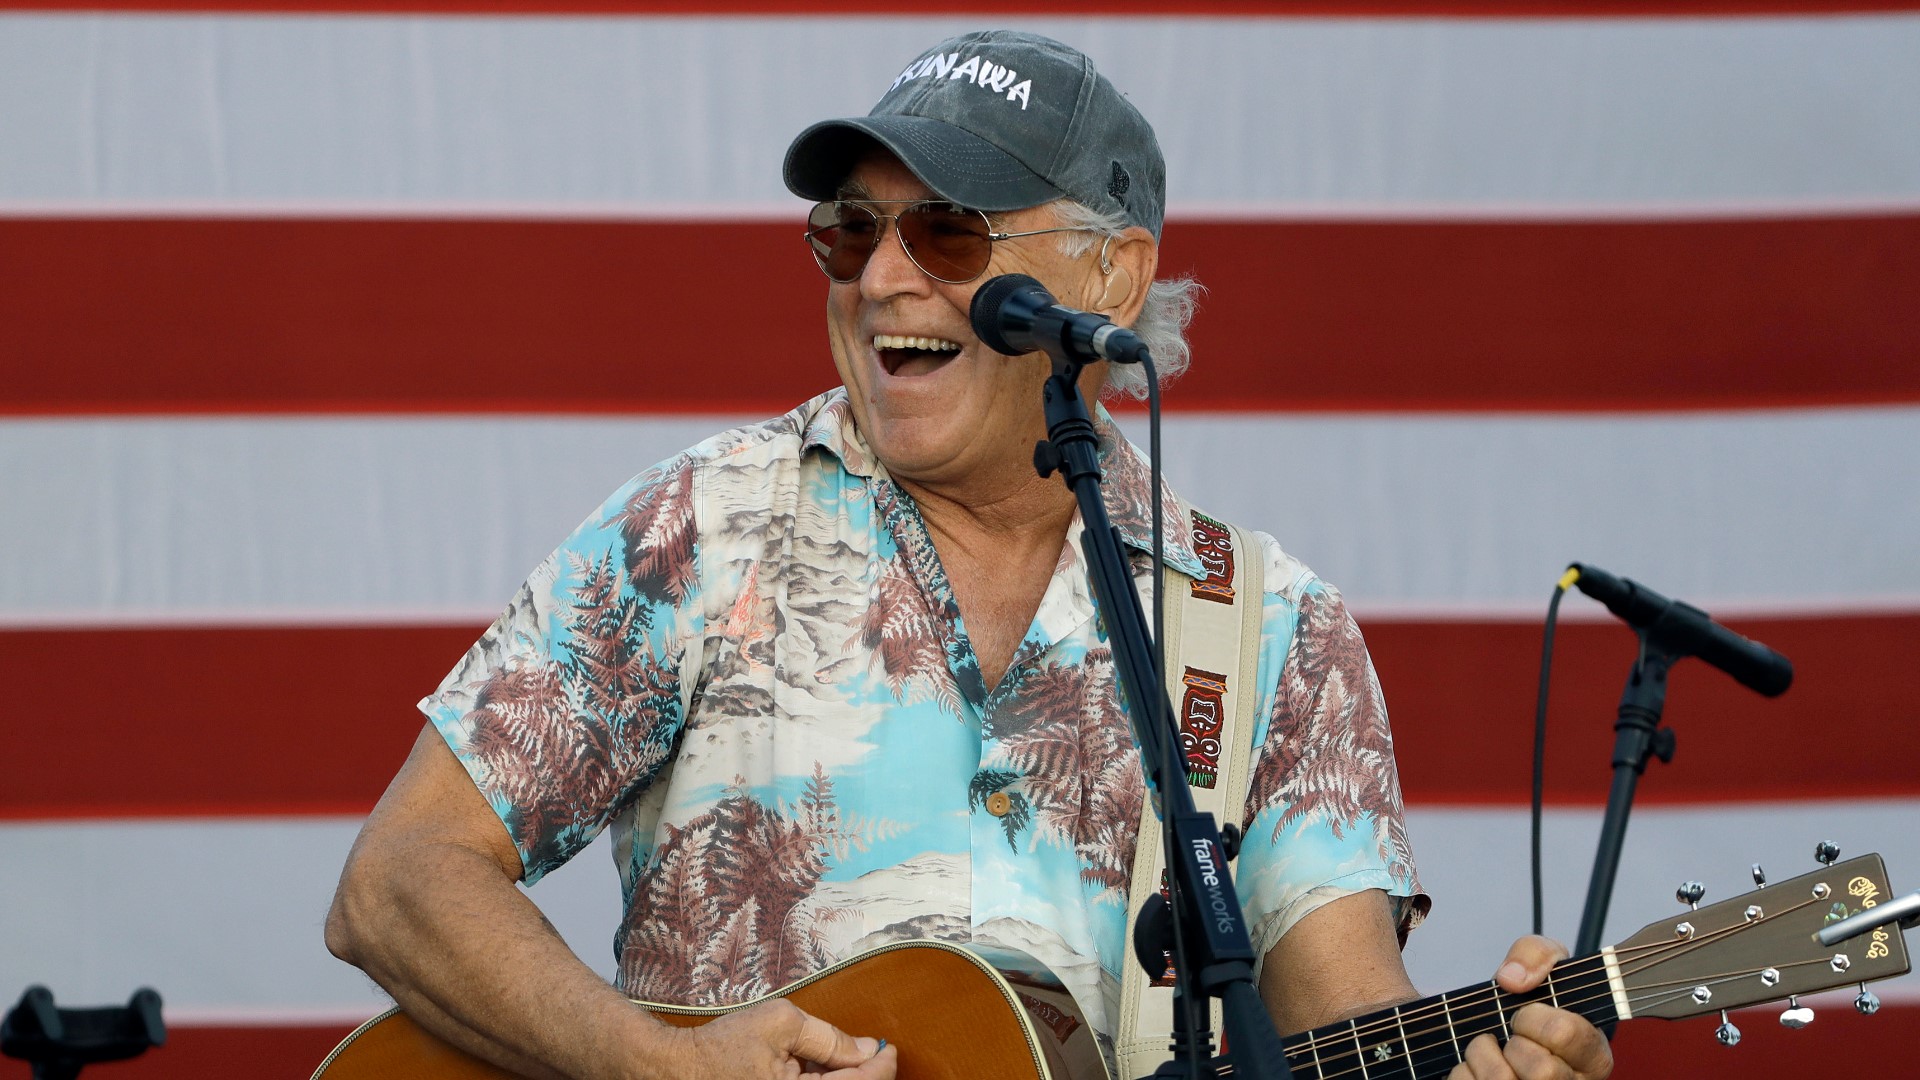 Jimmy Buffett takes over St. Pete Twitter page to promote new Pier